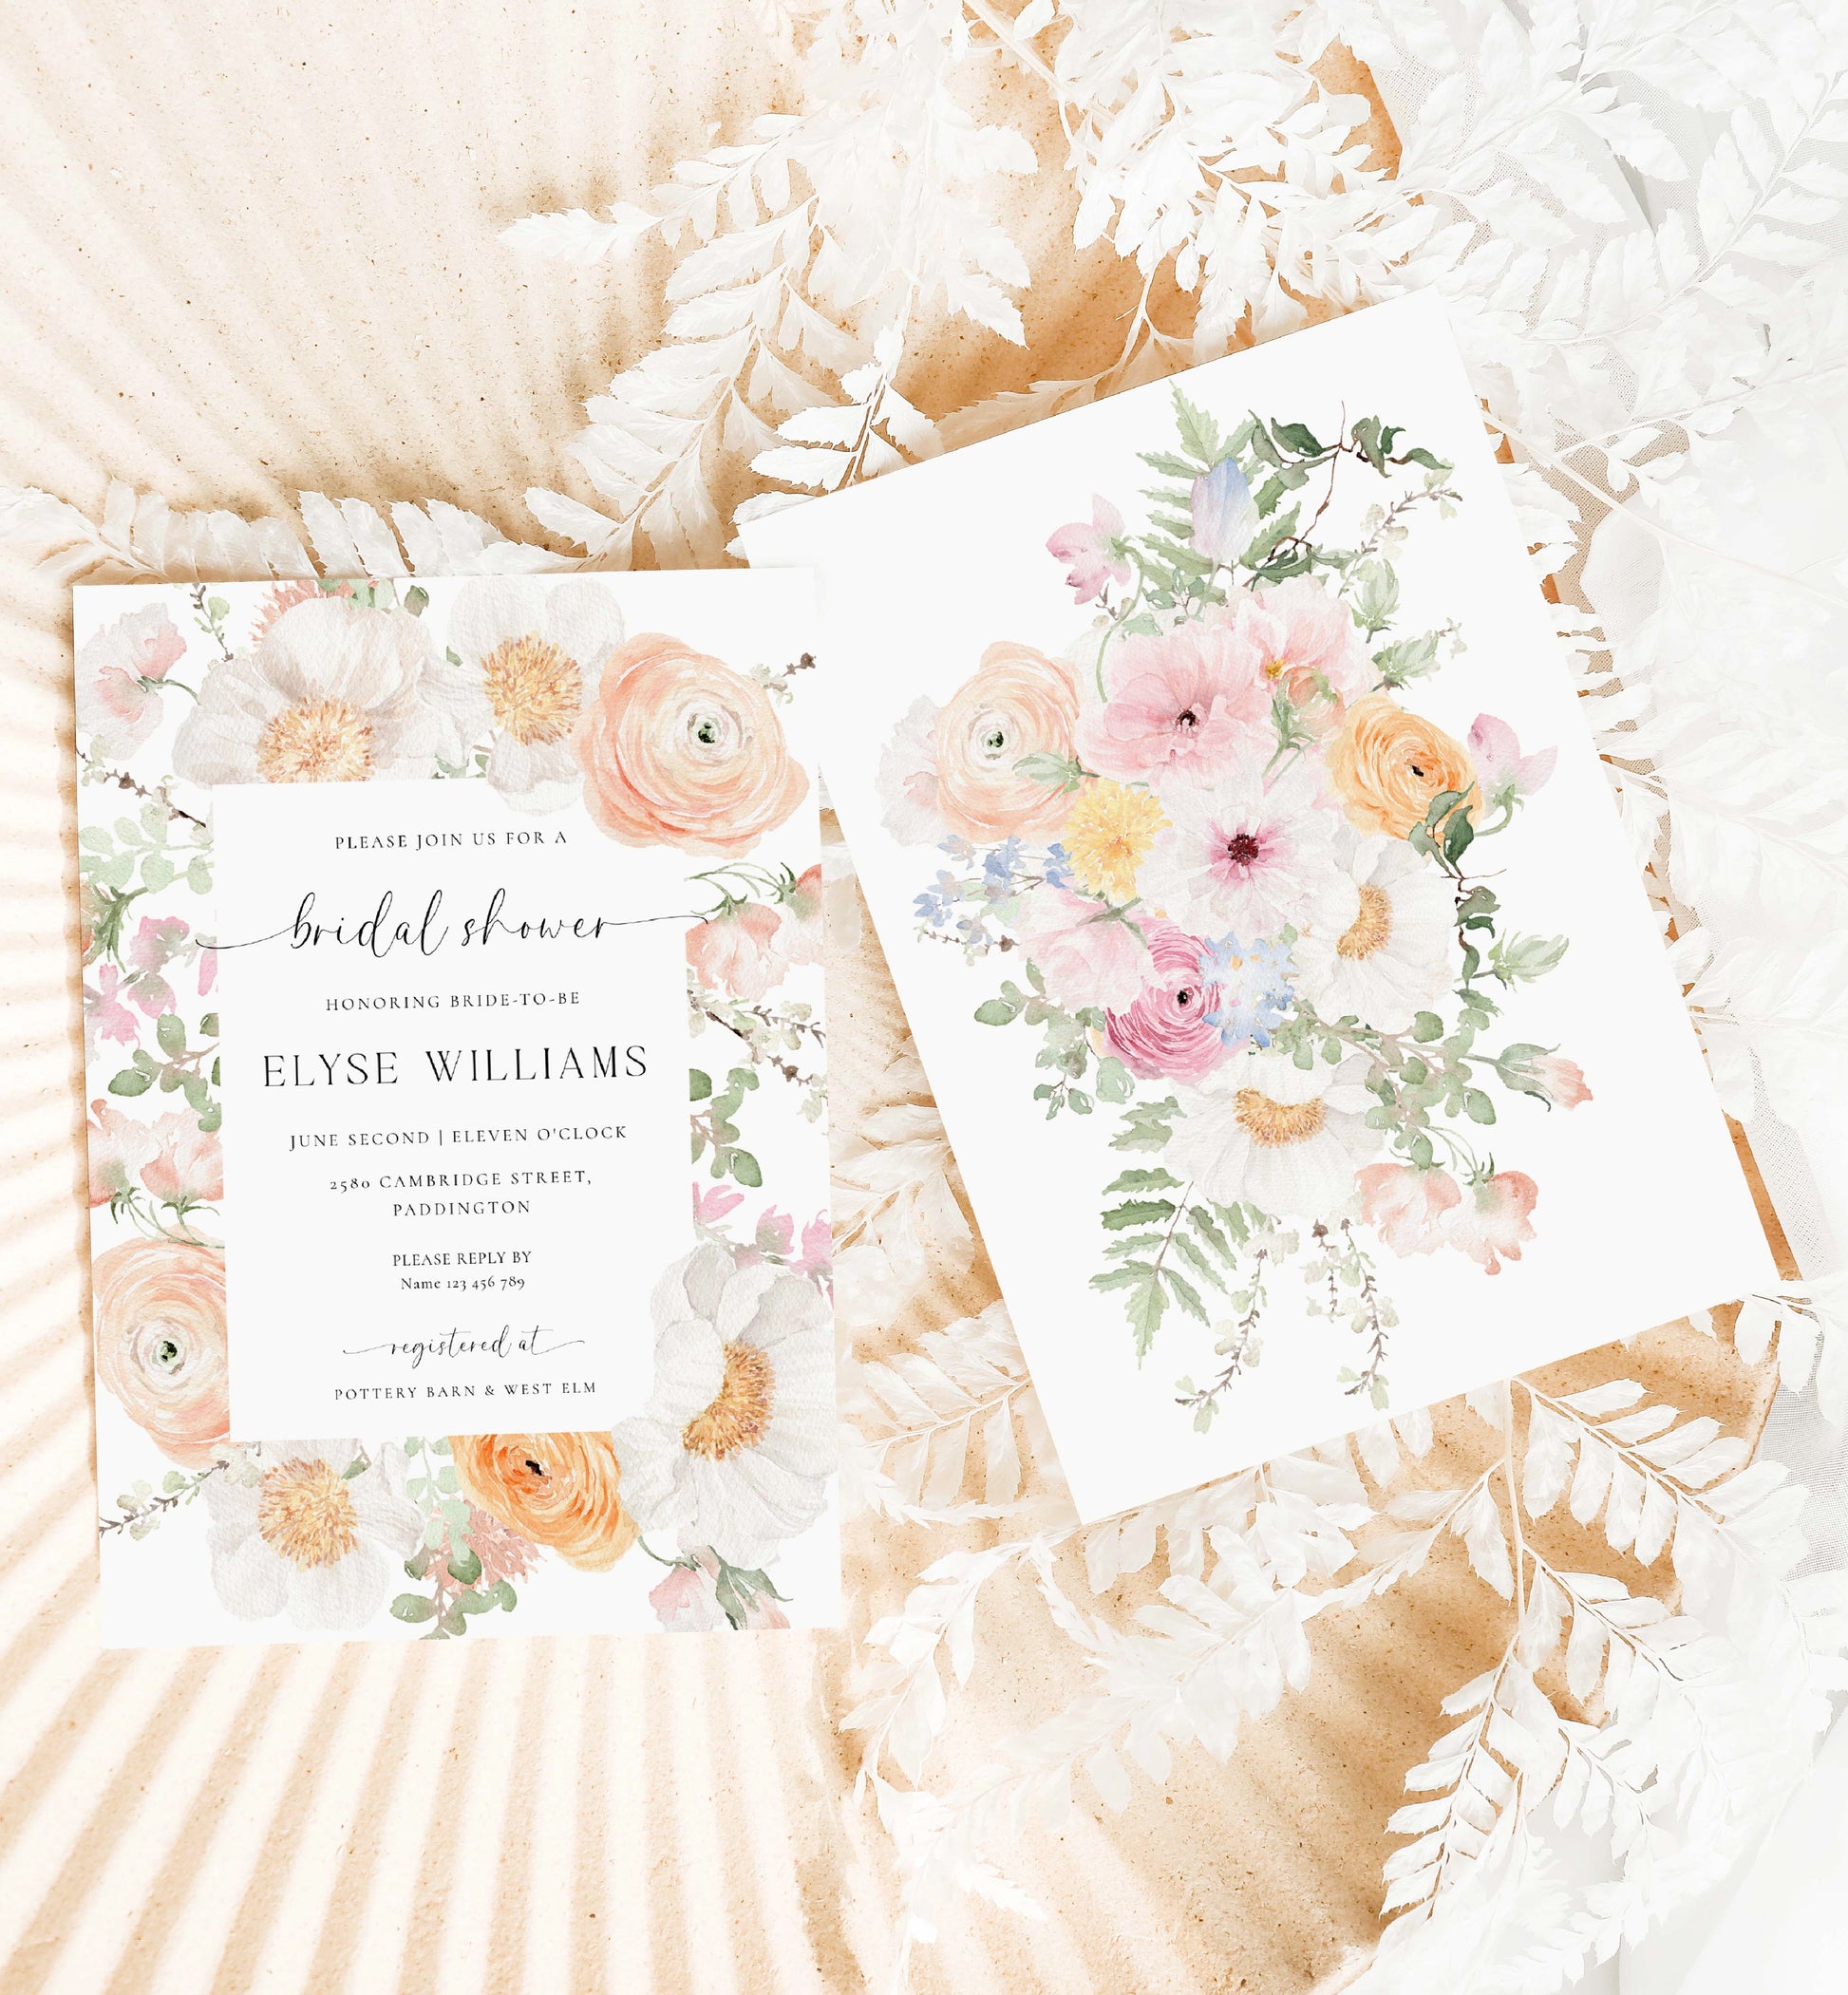 Printable Bridal Shower Invitation Template, Details and Thank You Card, Boho Wildflower Bridal Shower Invite, Pink Floral Hens Party Invite, Millie